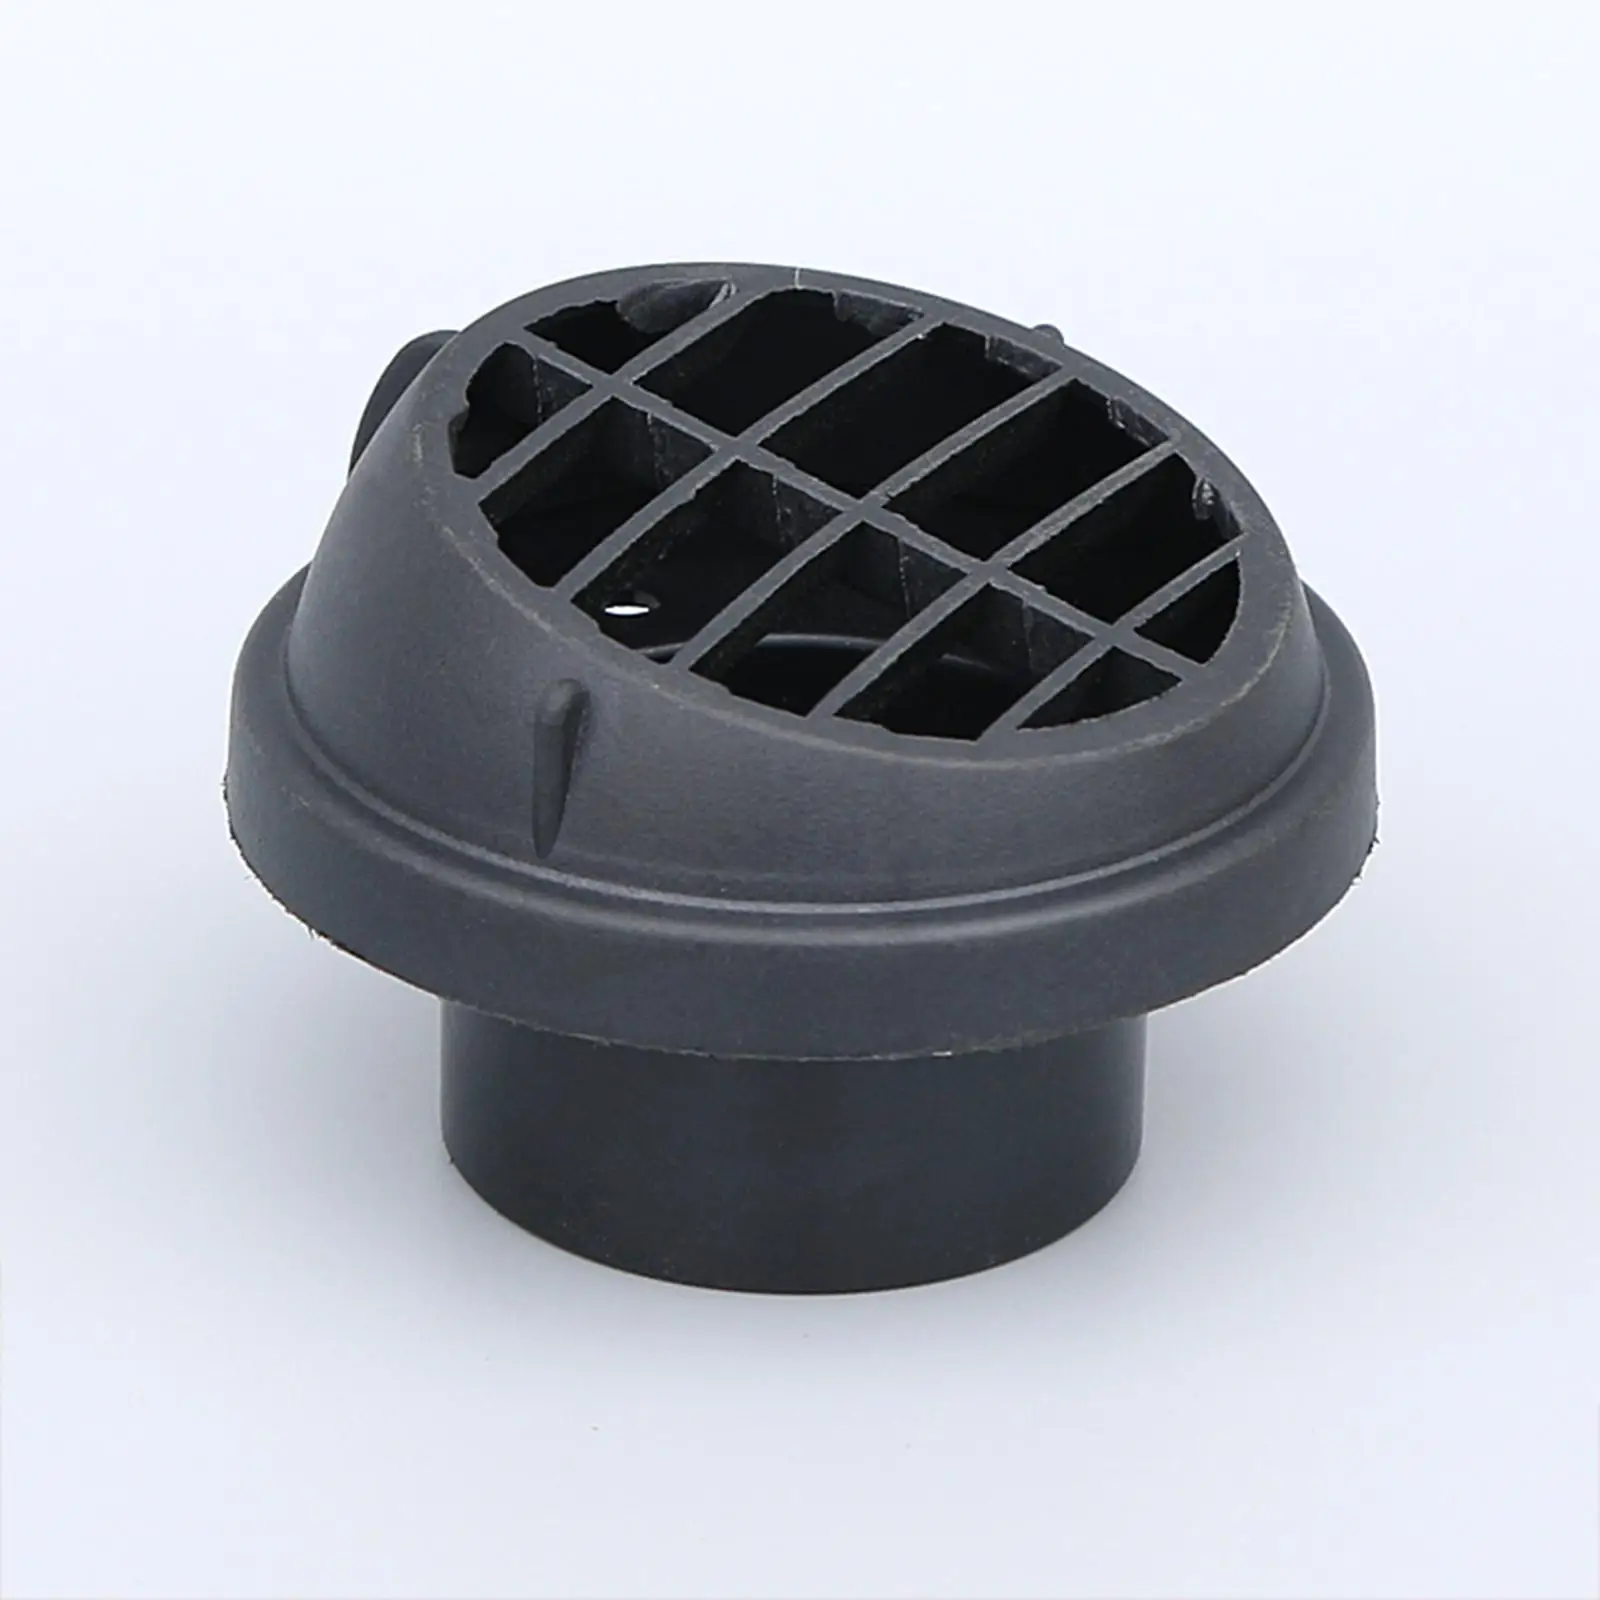 Parking Heater Air Vent Parking Heater Air Conditioner Vent Warm Heater Air Vent Outlet for Automotive Accessory Replaces